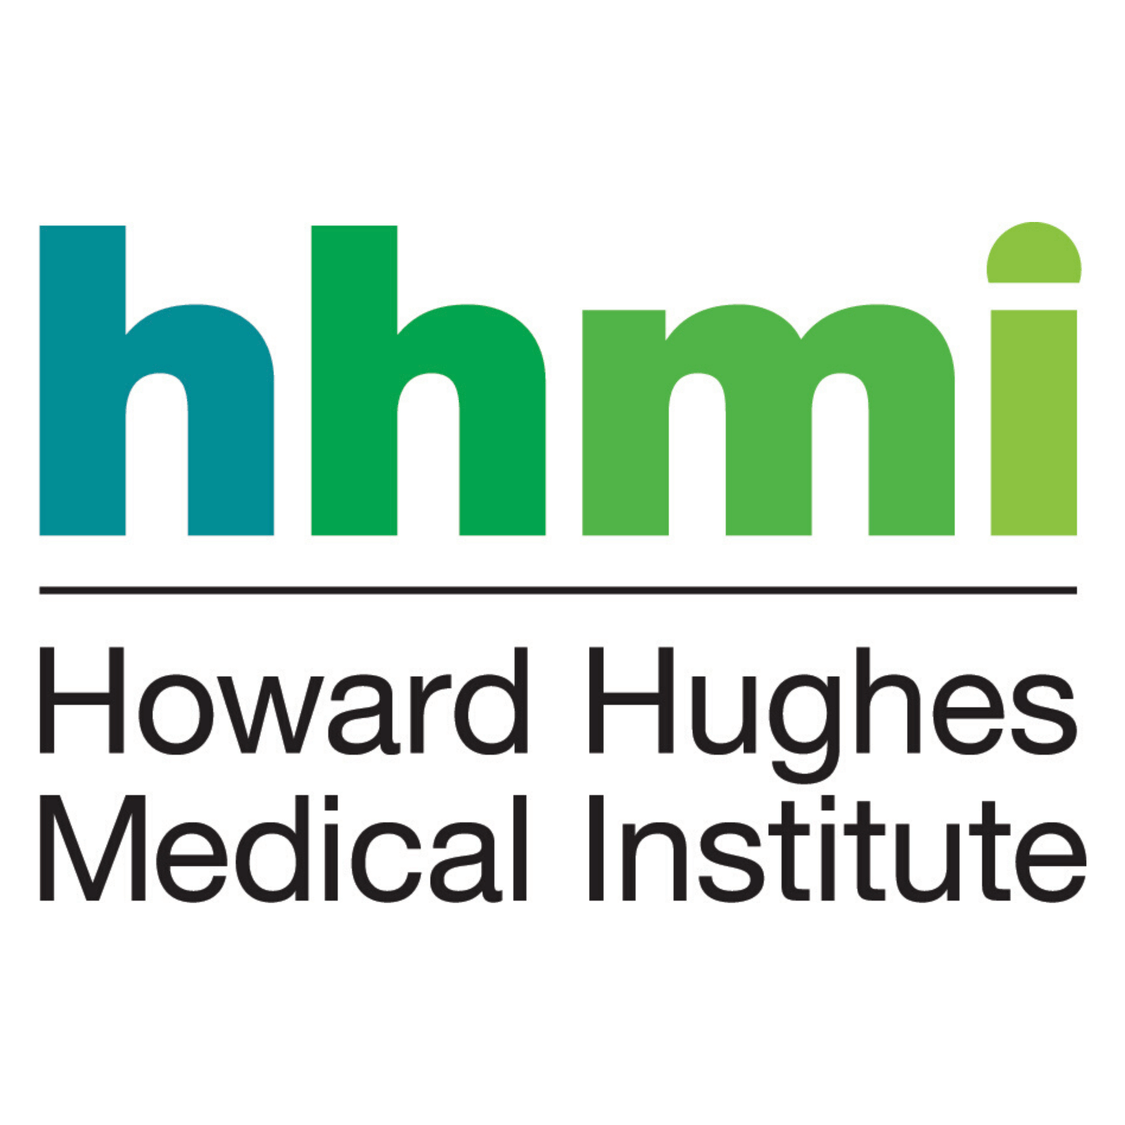 Howard Hughes Medical Institute logo, In shades of green and cyan the letters h h m I are together in lowercase. Below is a black horizontal line. Under this line reads, “Howard Hughes Medical Institute.”